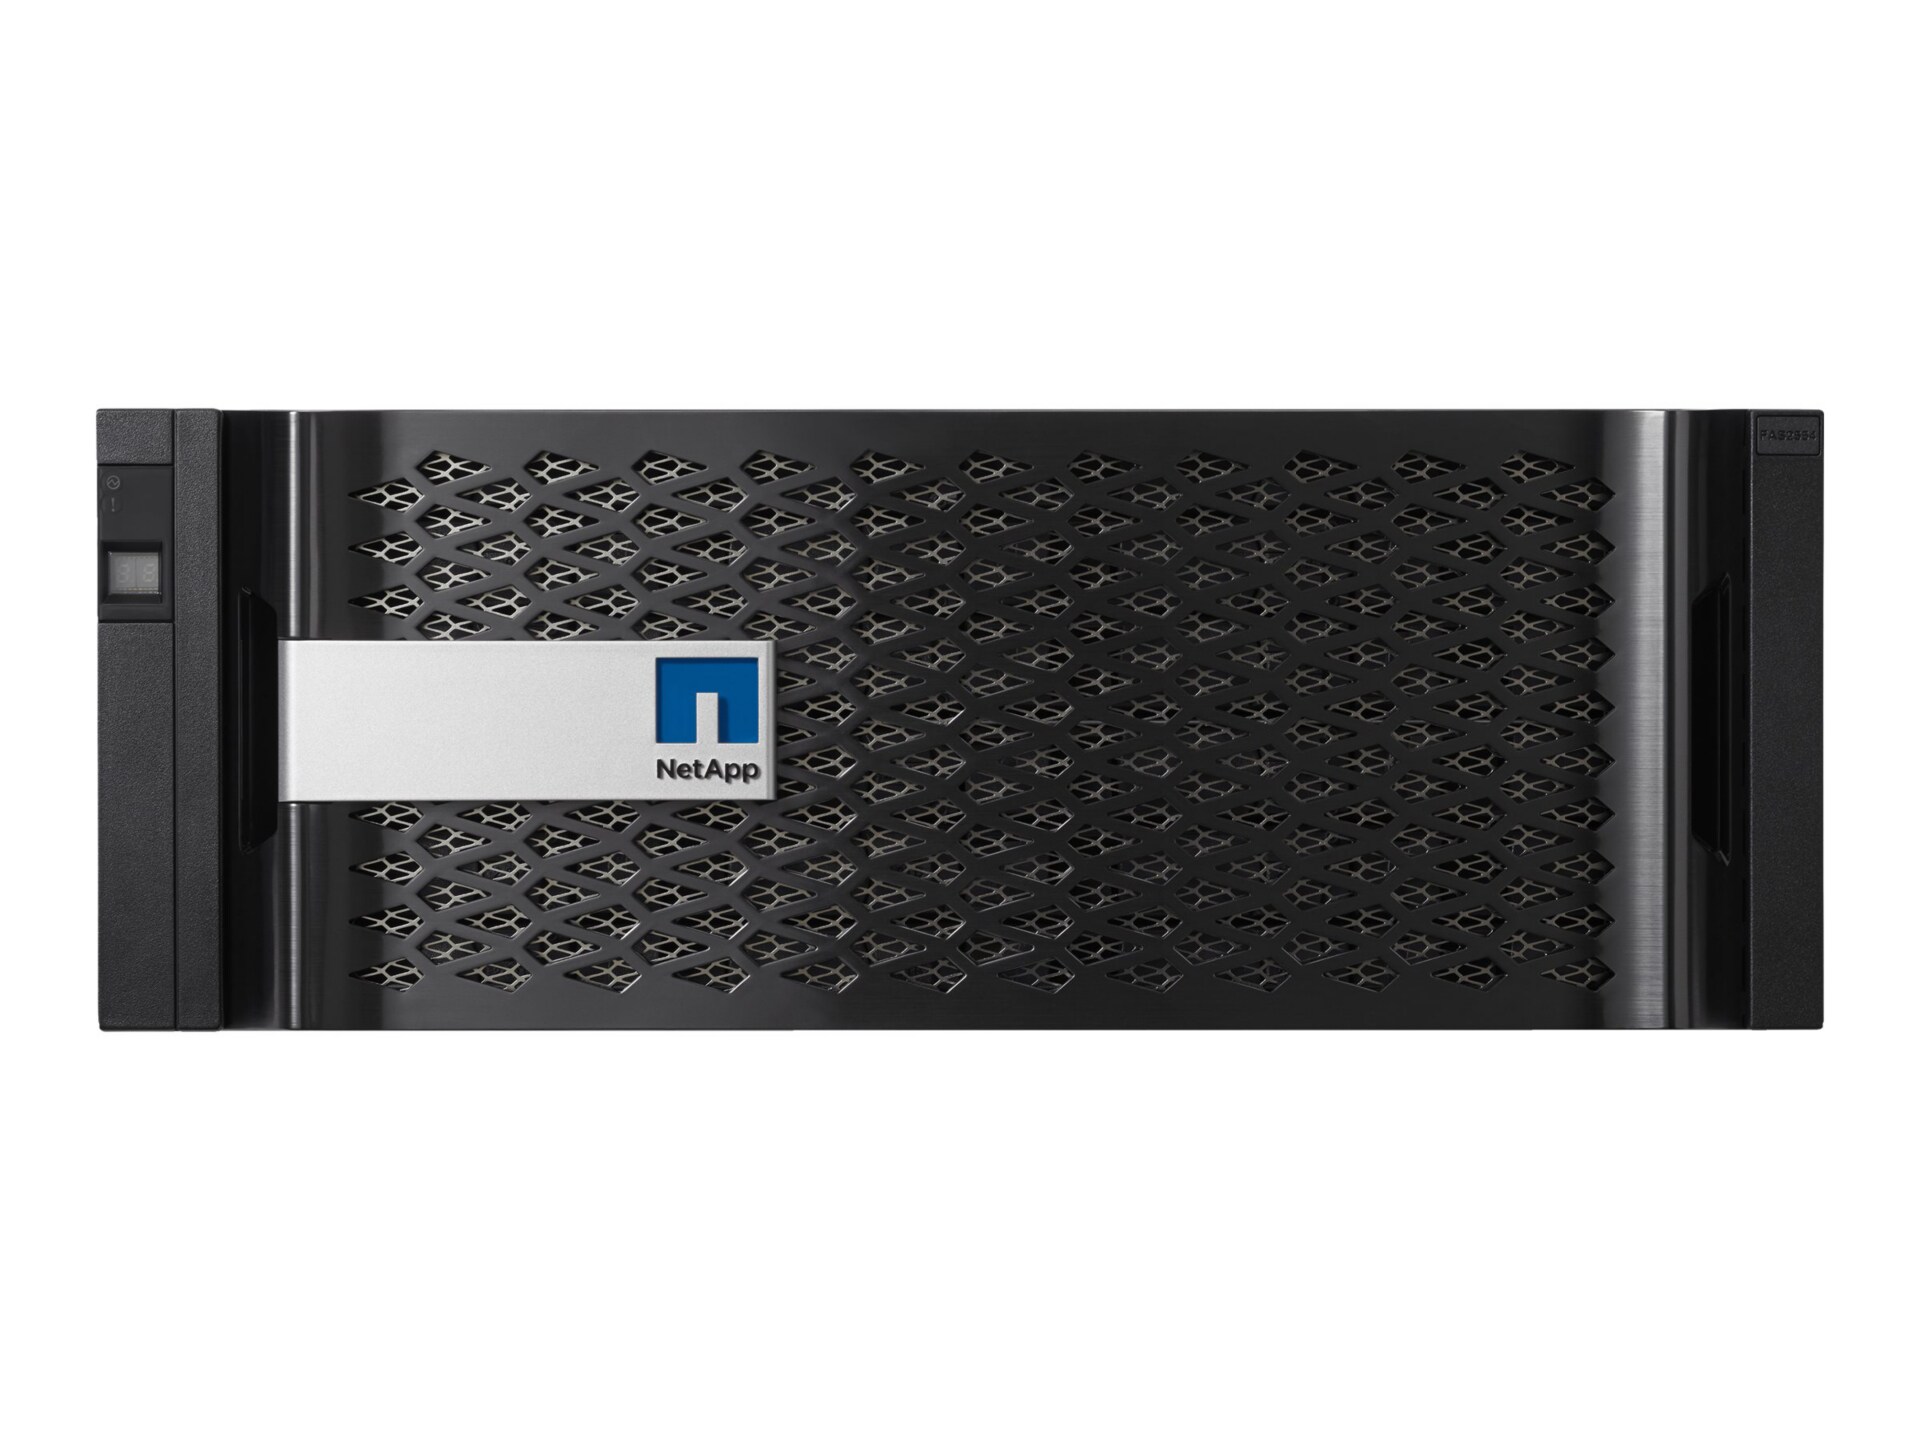 Netapp 24TB FAS2554 Dual-Ctrlr Sys with 10Gb Ethernet optics and cables